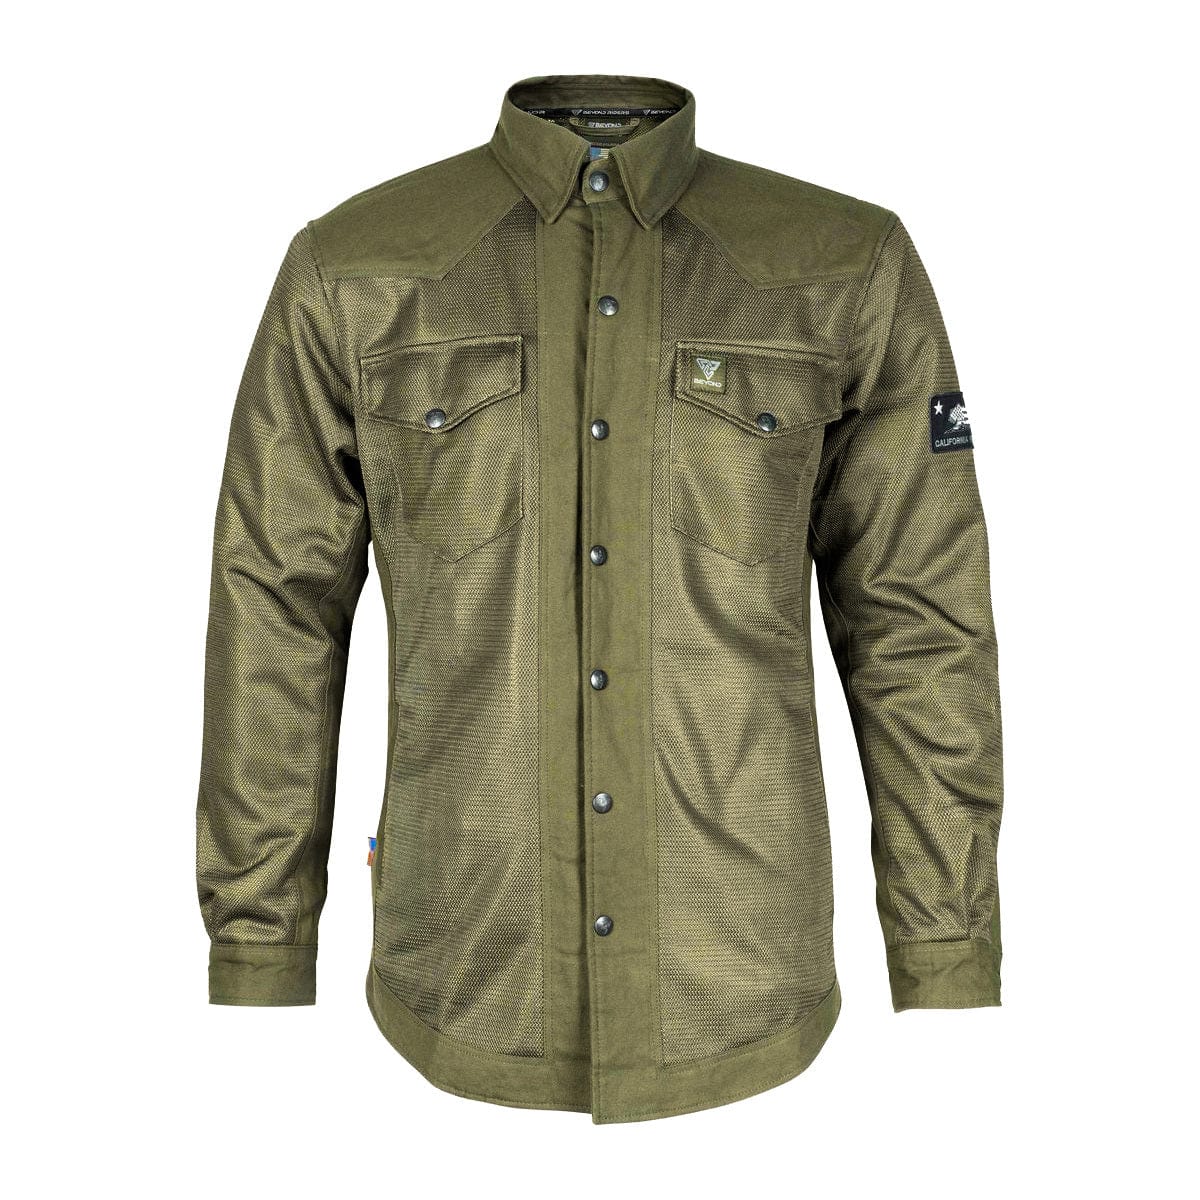 Protective Summer Mesh Shirt with Pads - Army Green Solid